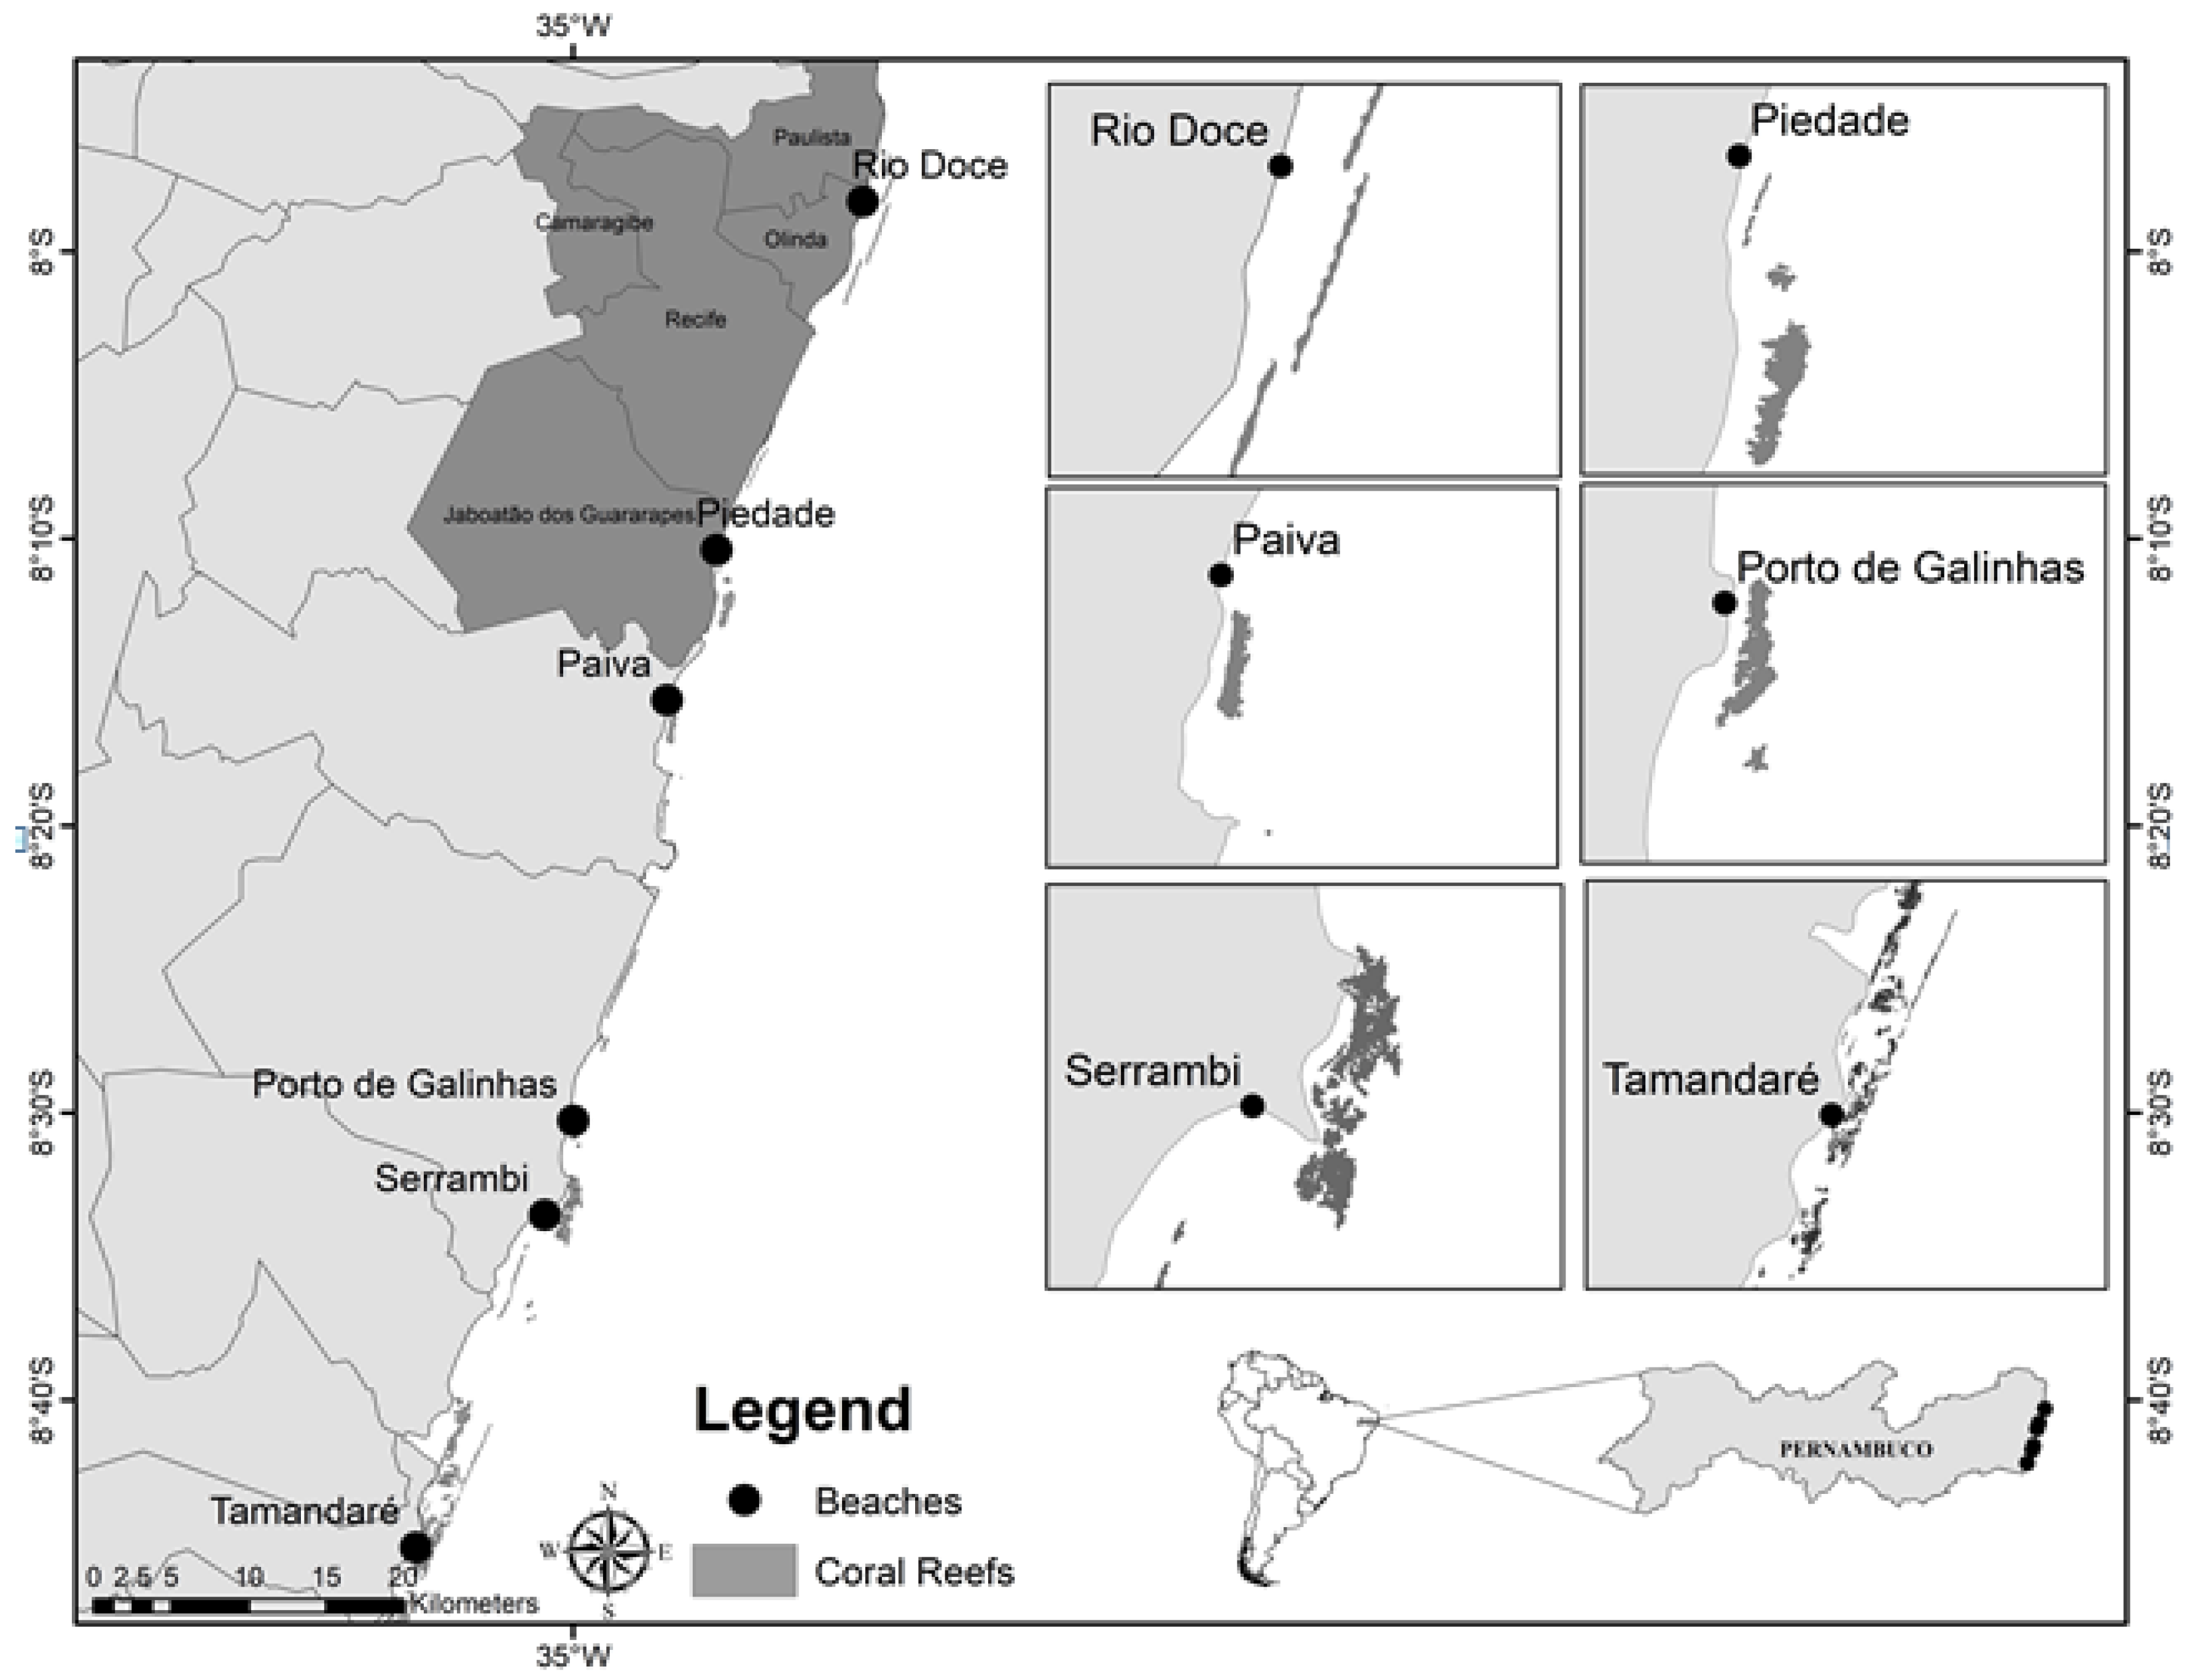 Location of the coral reef regions along the Brazilian coast.